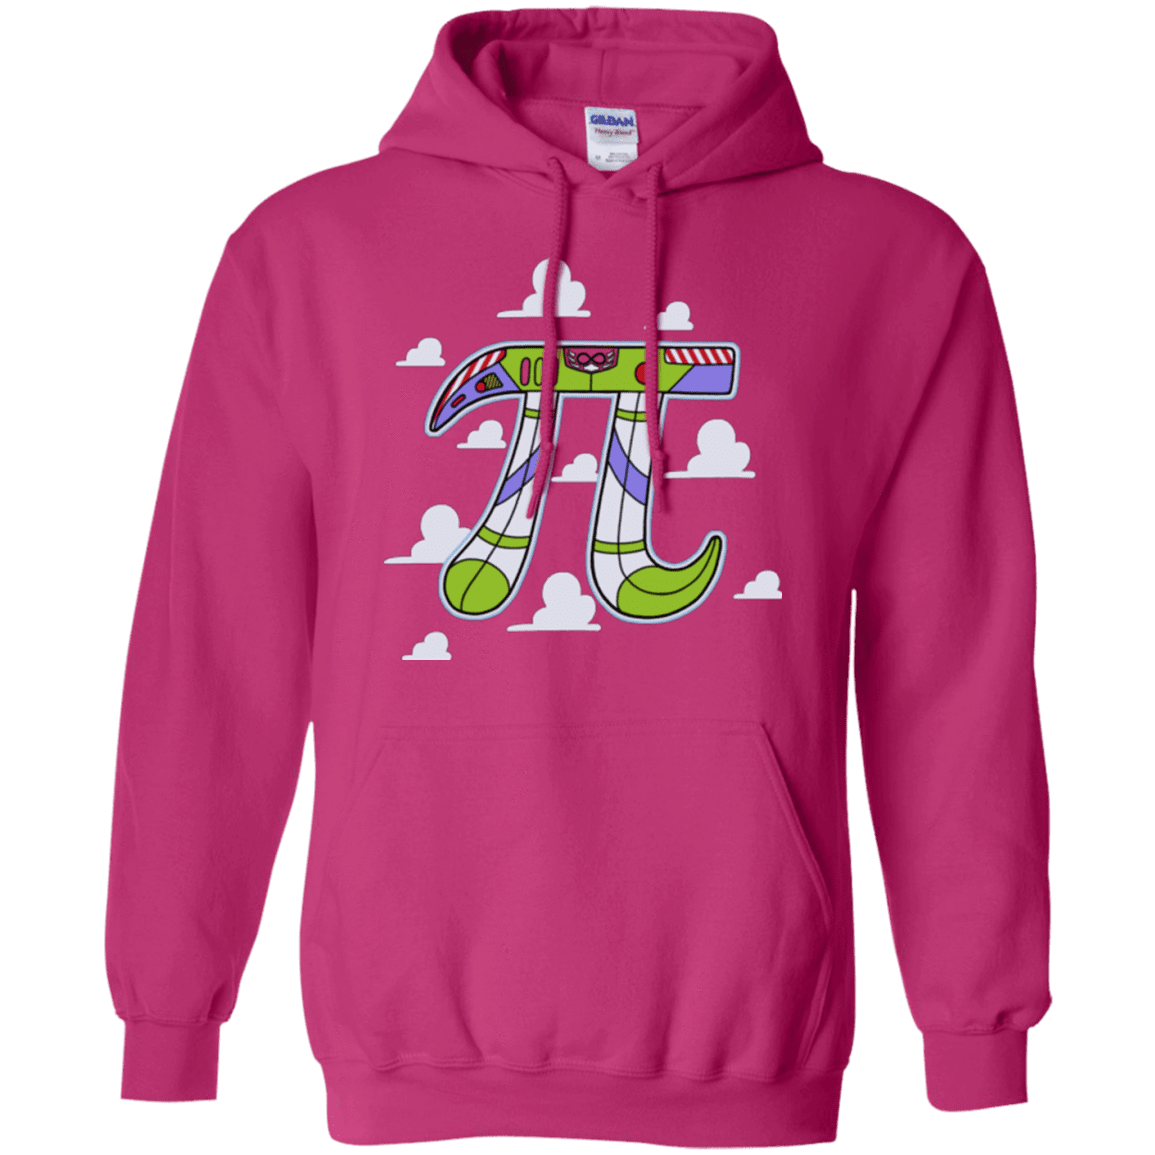 Sweatshirts Heliconia / Small To Infinity Pullover Hoodie